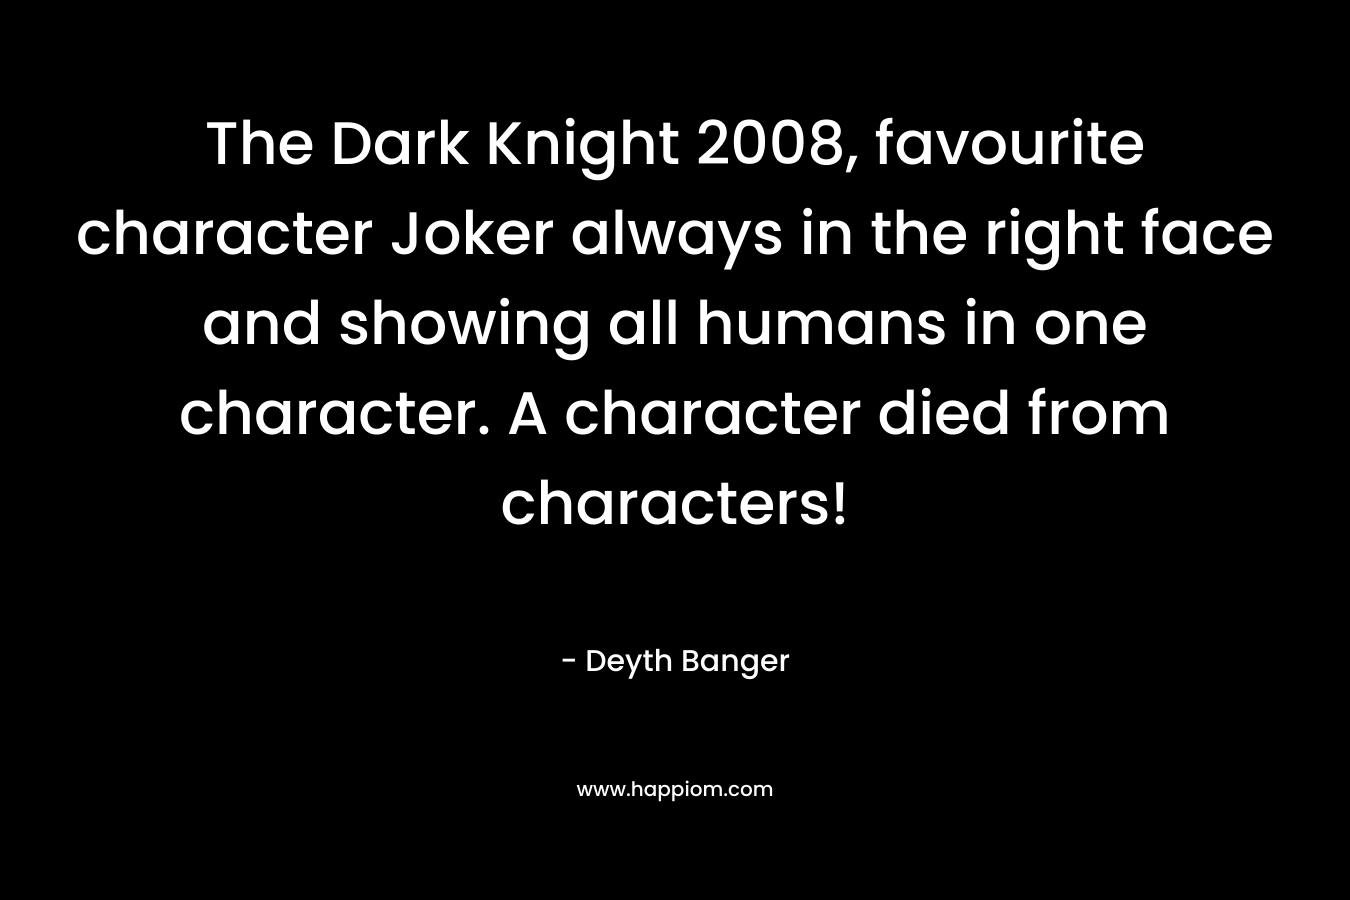 The Dark Knight 2008, favourite character Joker always in the right face and showing all humans in one character. A character died from characters! – Deyth Banger